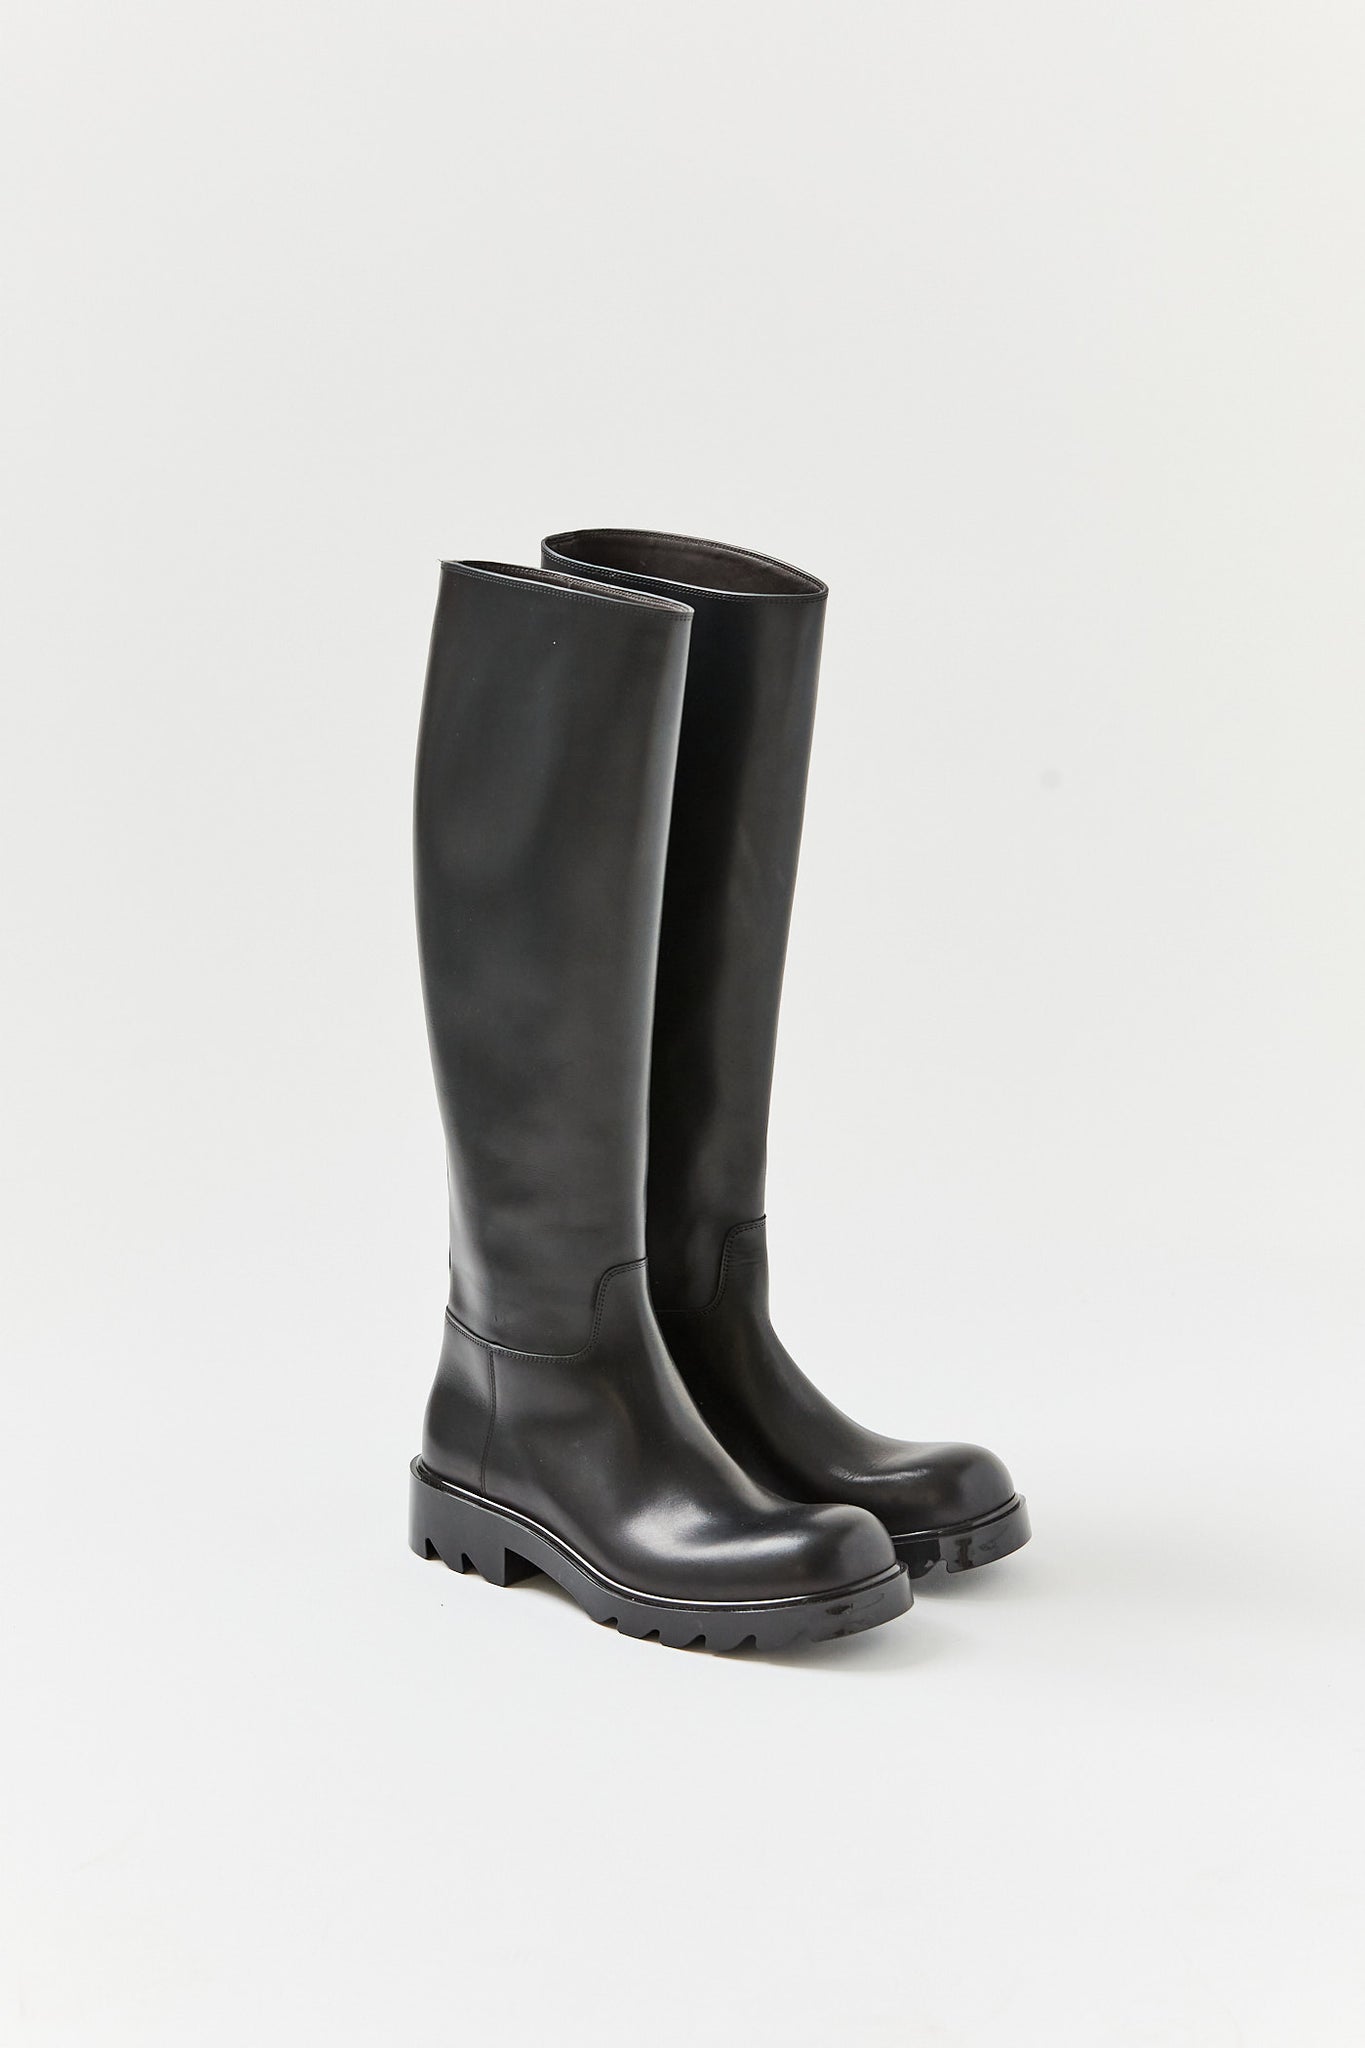 Black Leather Boot